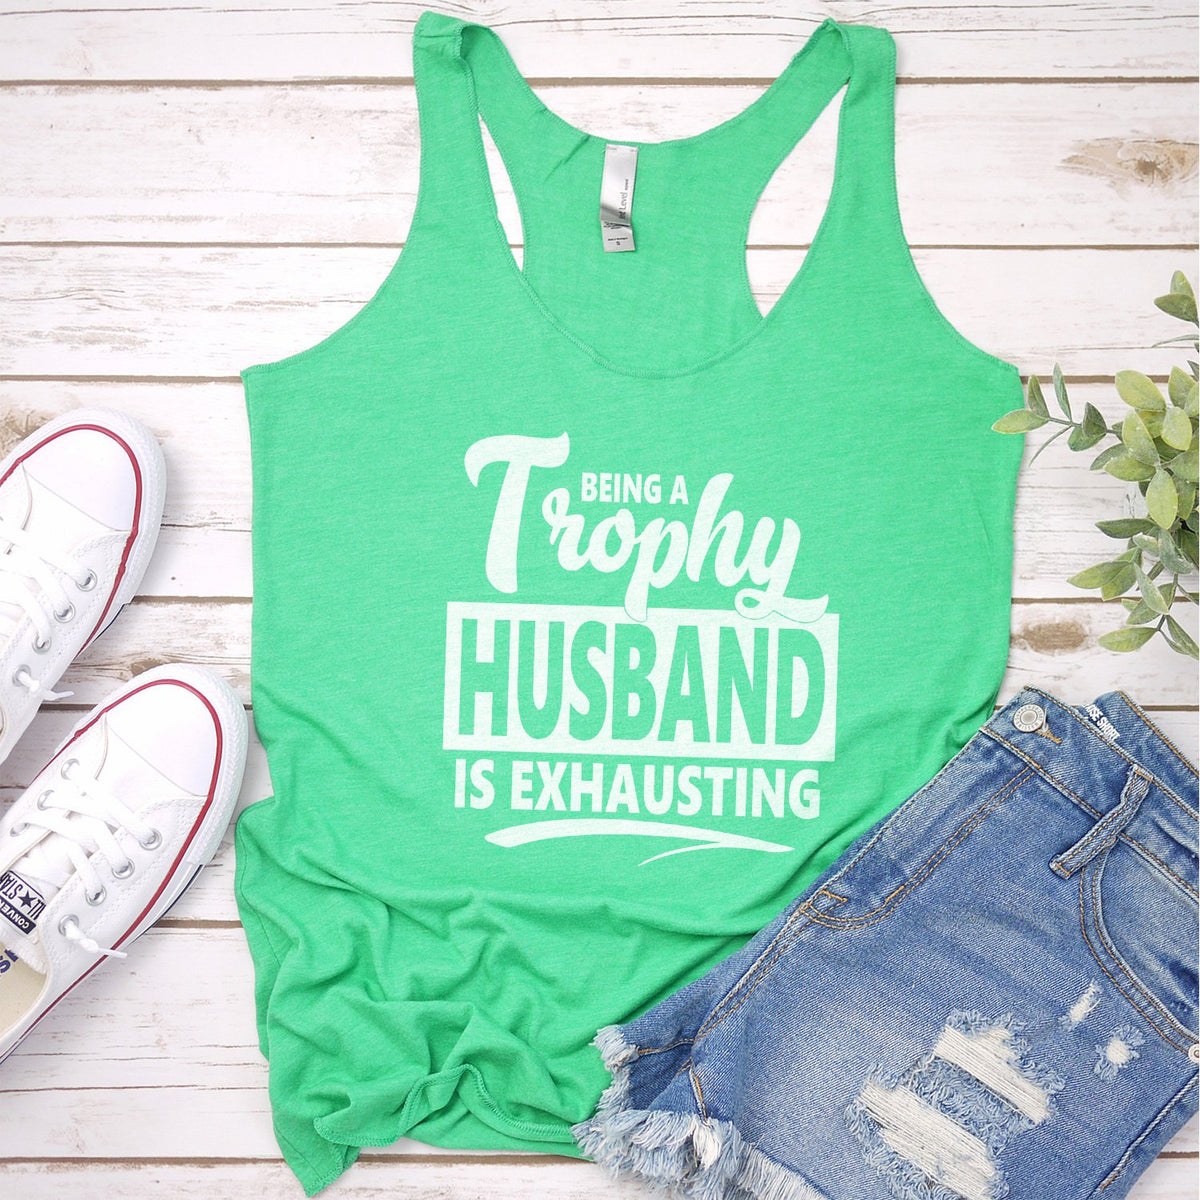 Being A Trophy Husband is Exhausting - Tank Top Racerback